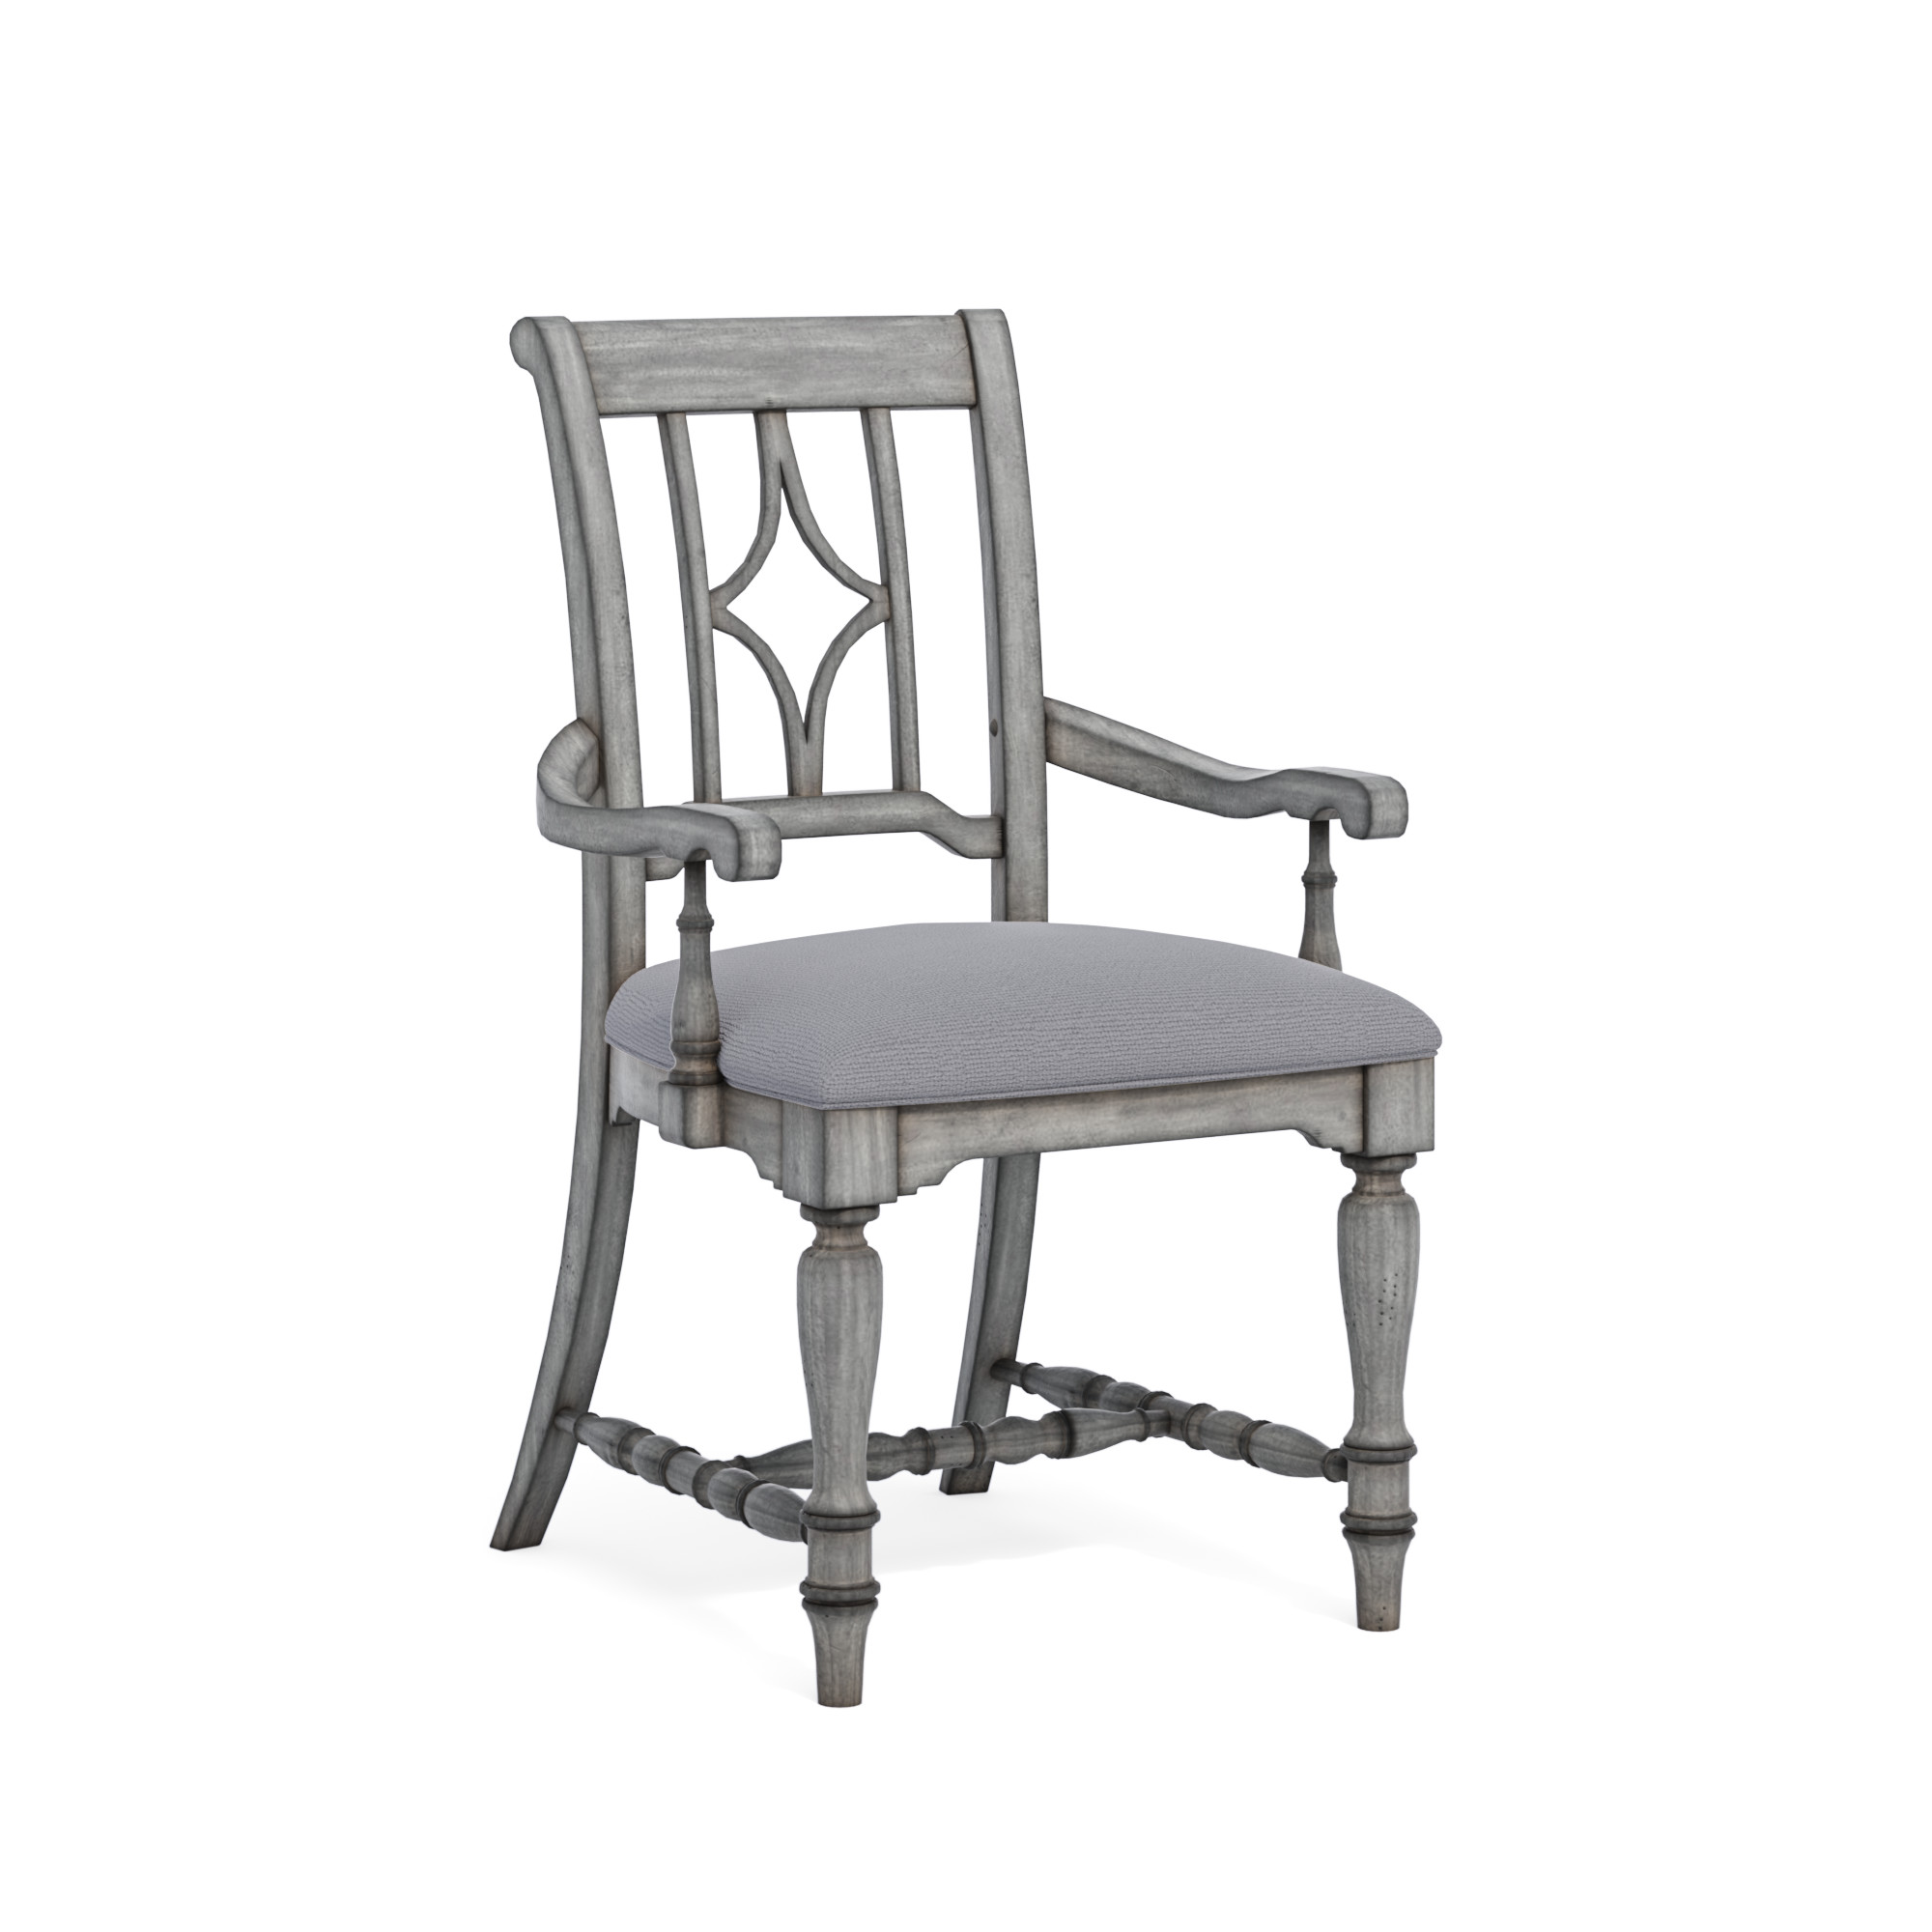 Flexsteel Plymouth Upholstered Arm Dining Chair